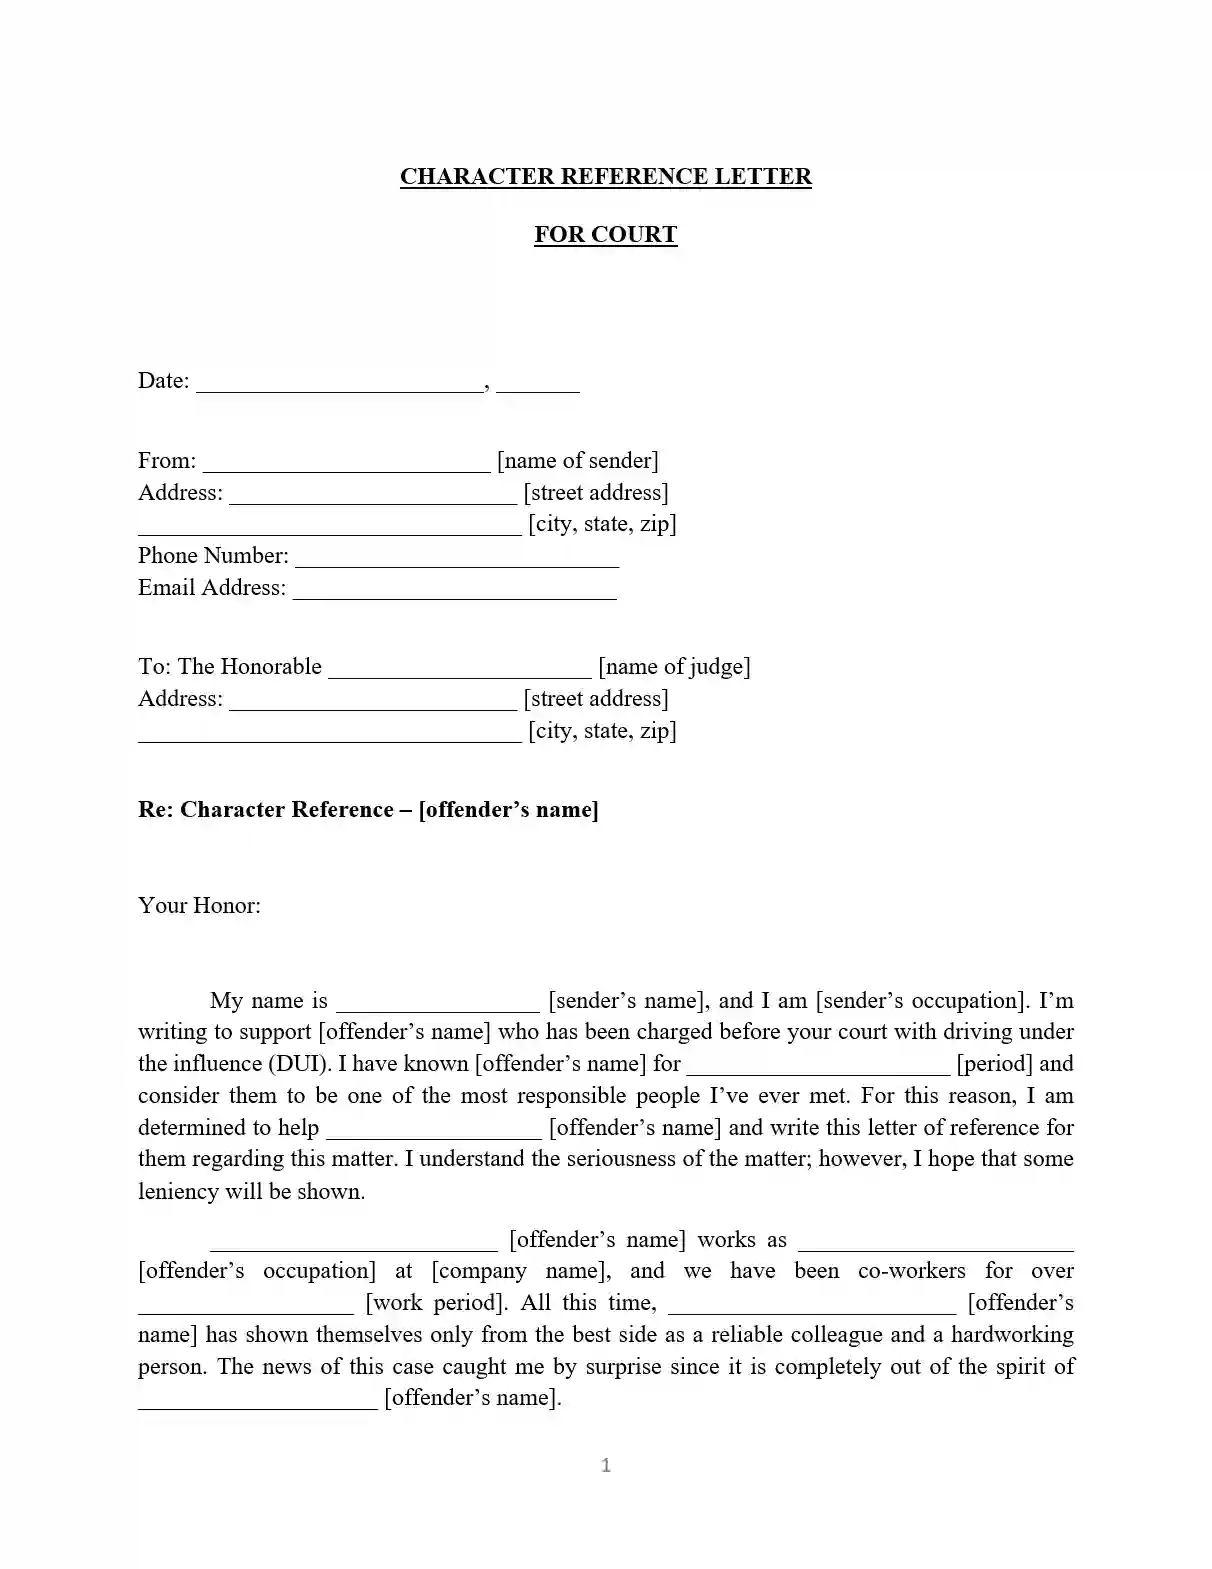 court reference letter - offense